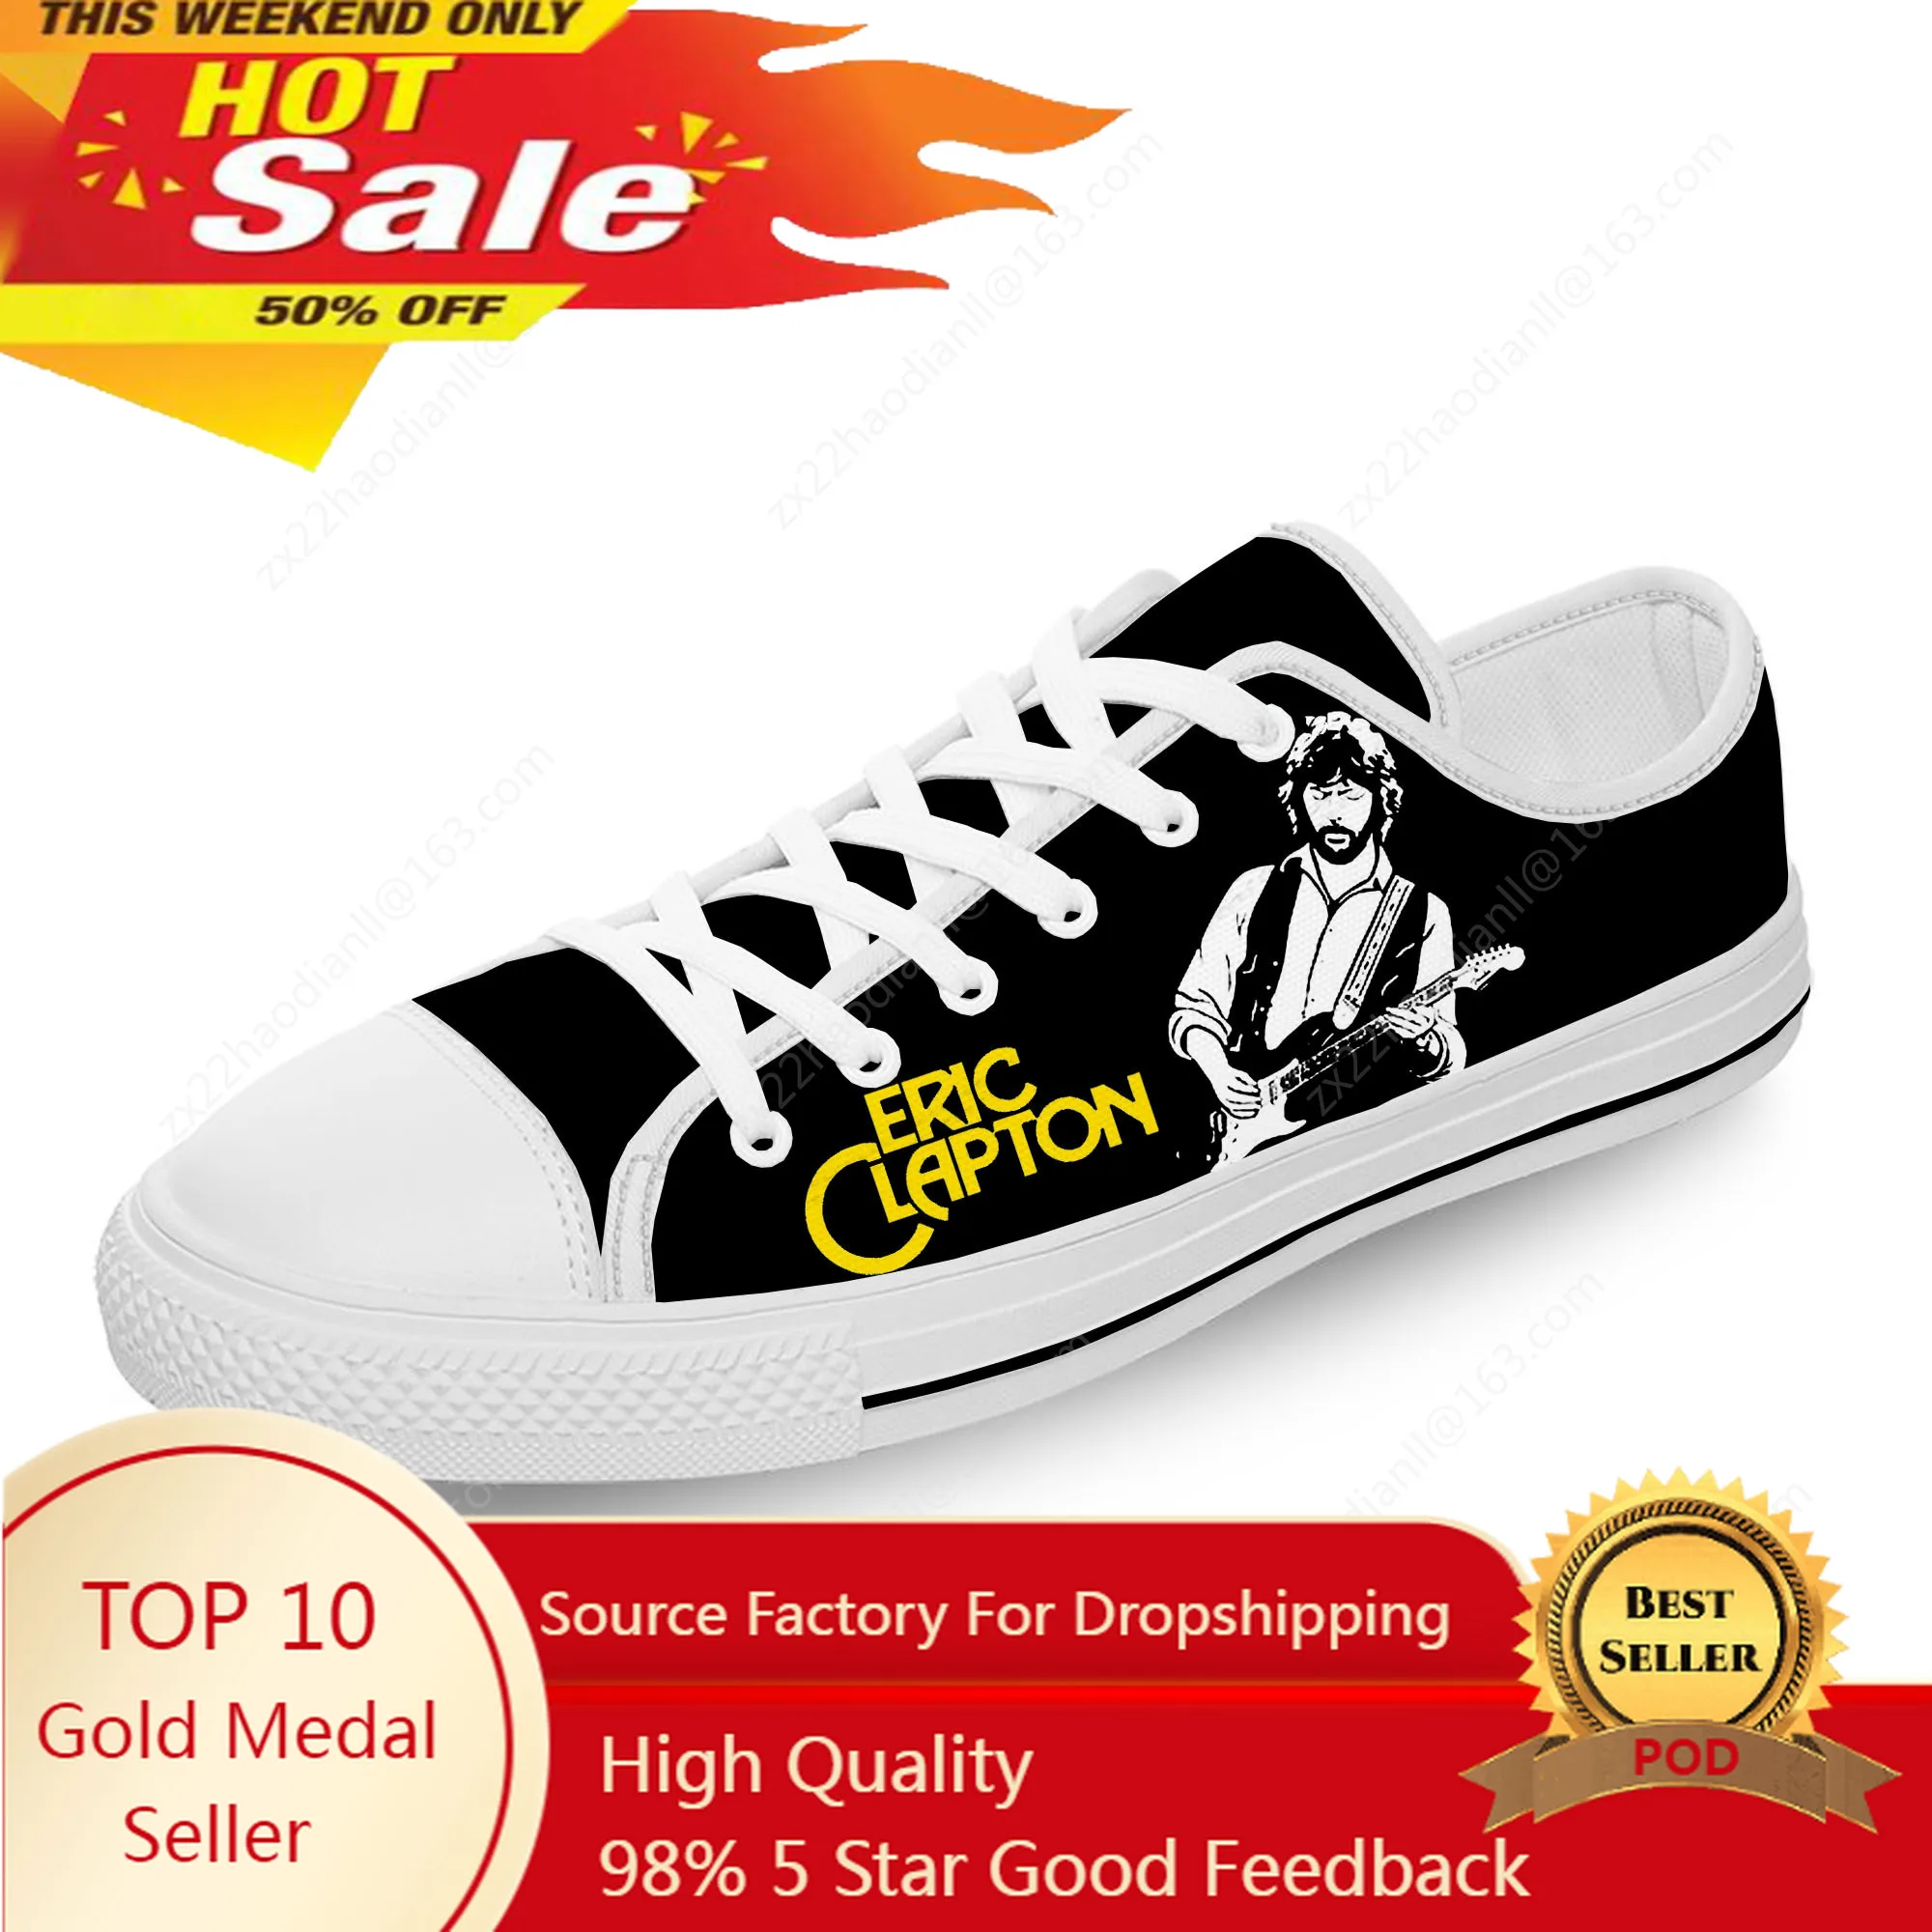 

Eric Clapton Low Top Sneakers Mens Womens Teenager Casual Shoes Canvas Running Shoes 3D Print Breathable Lightweight Shoe White